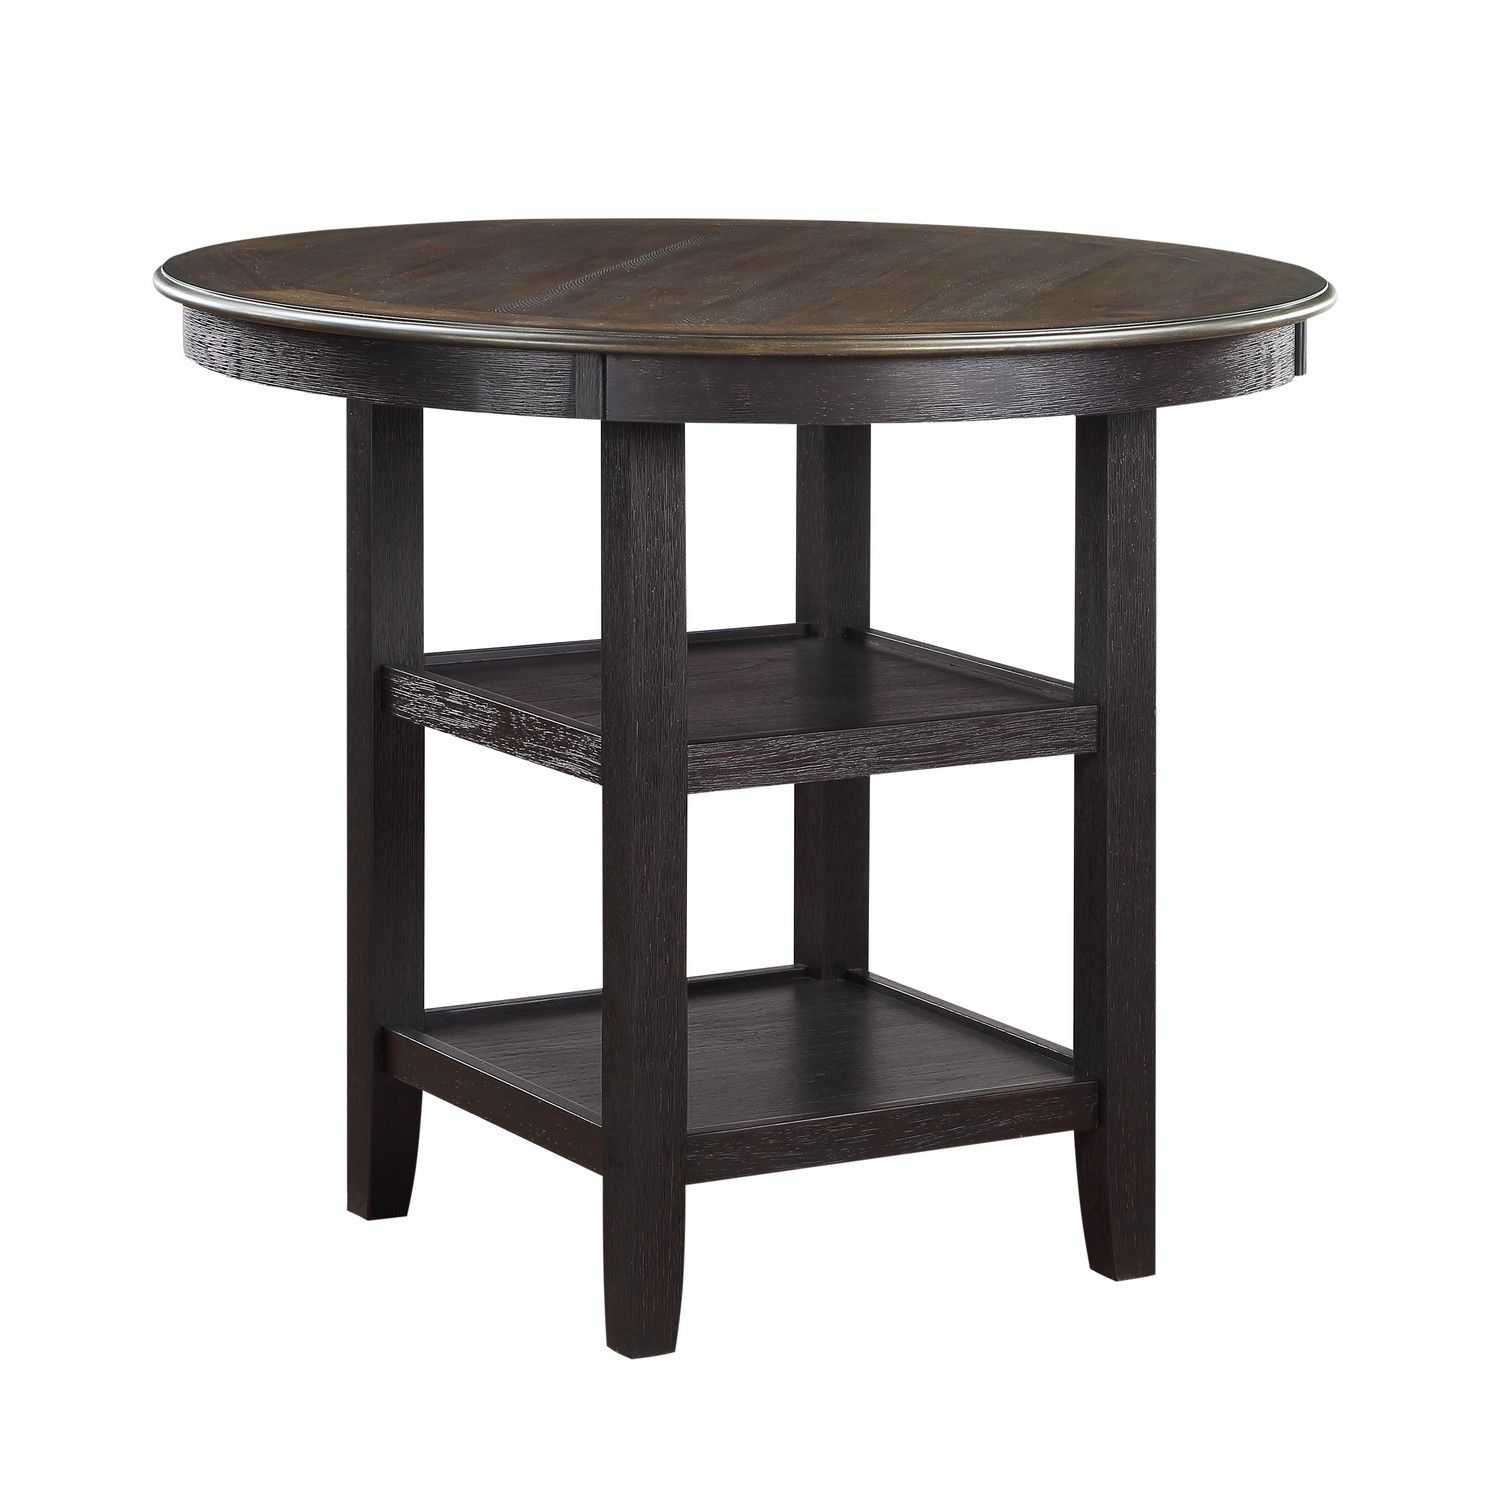 Homelegance Asher Counter Height Table - Brown/Black